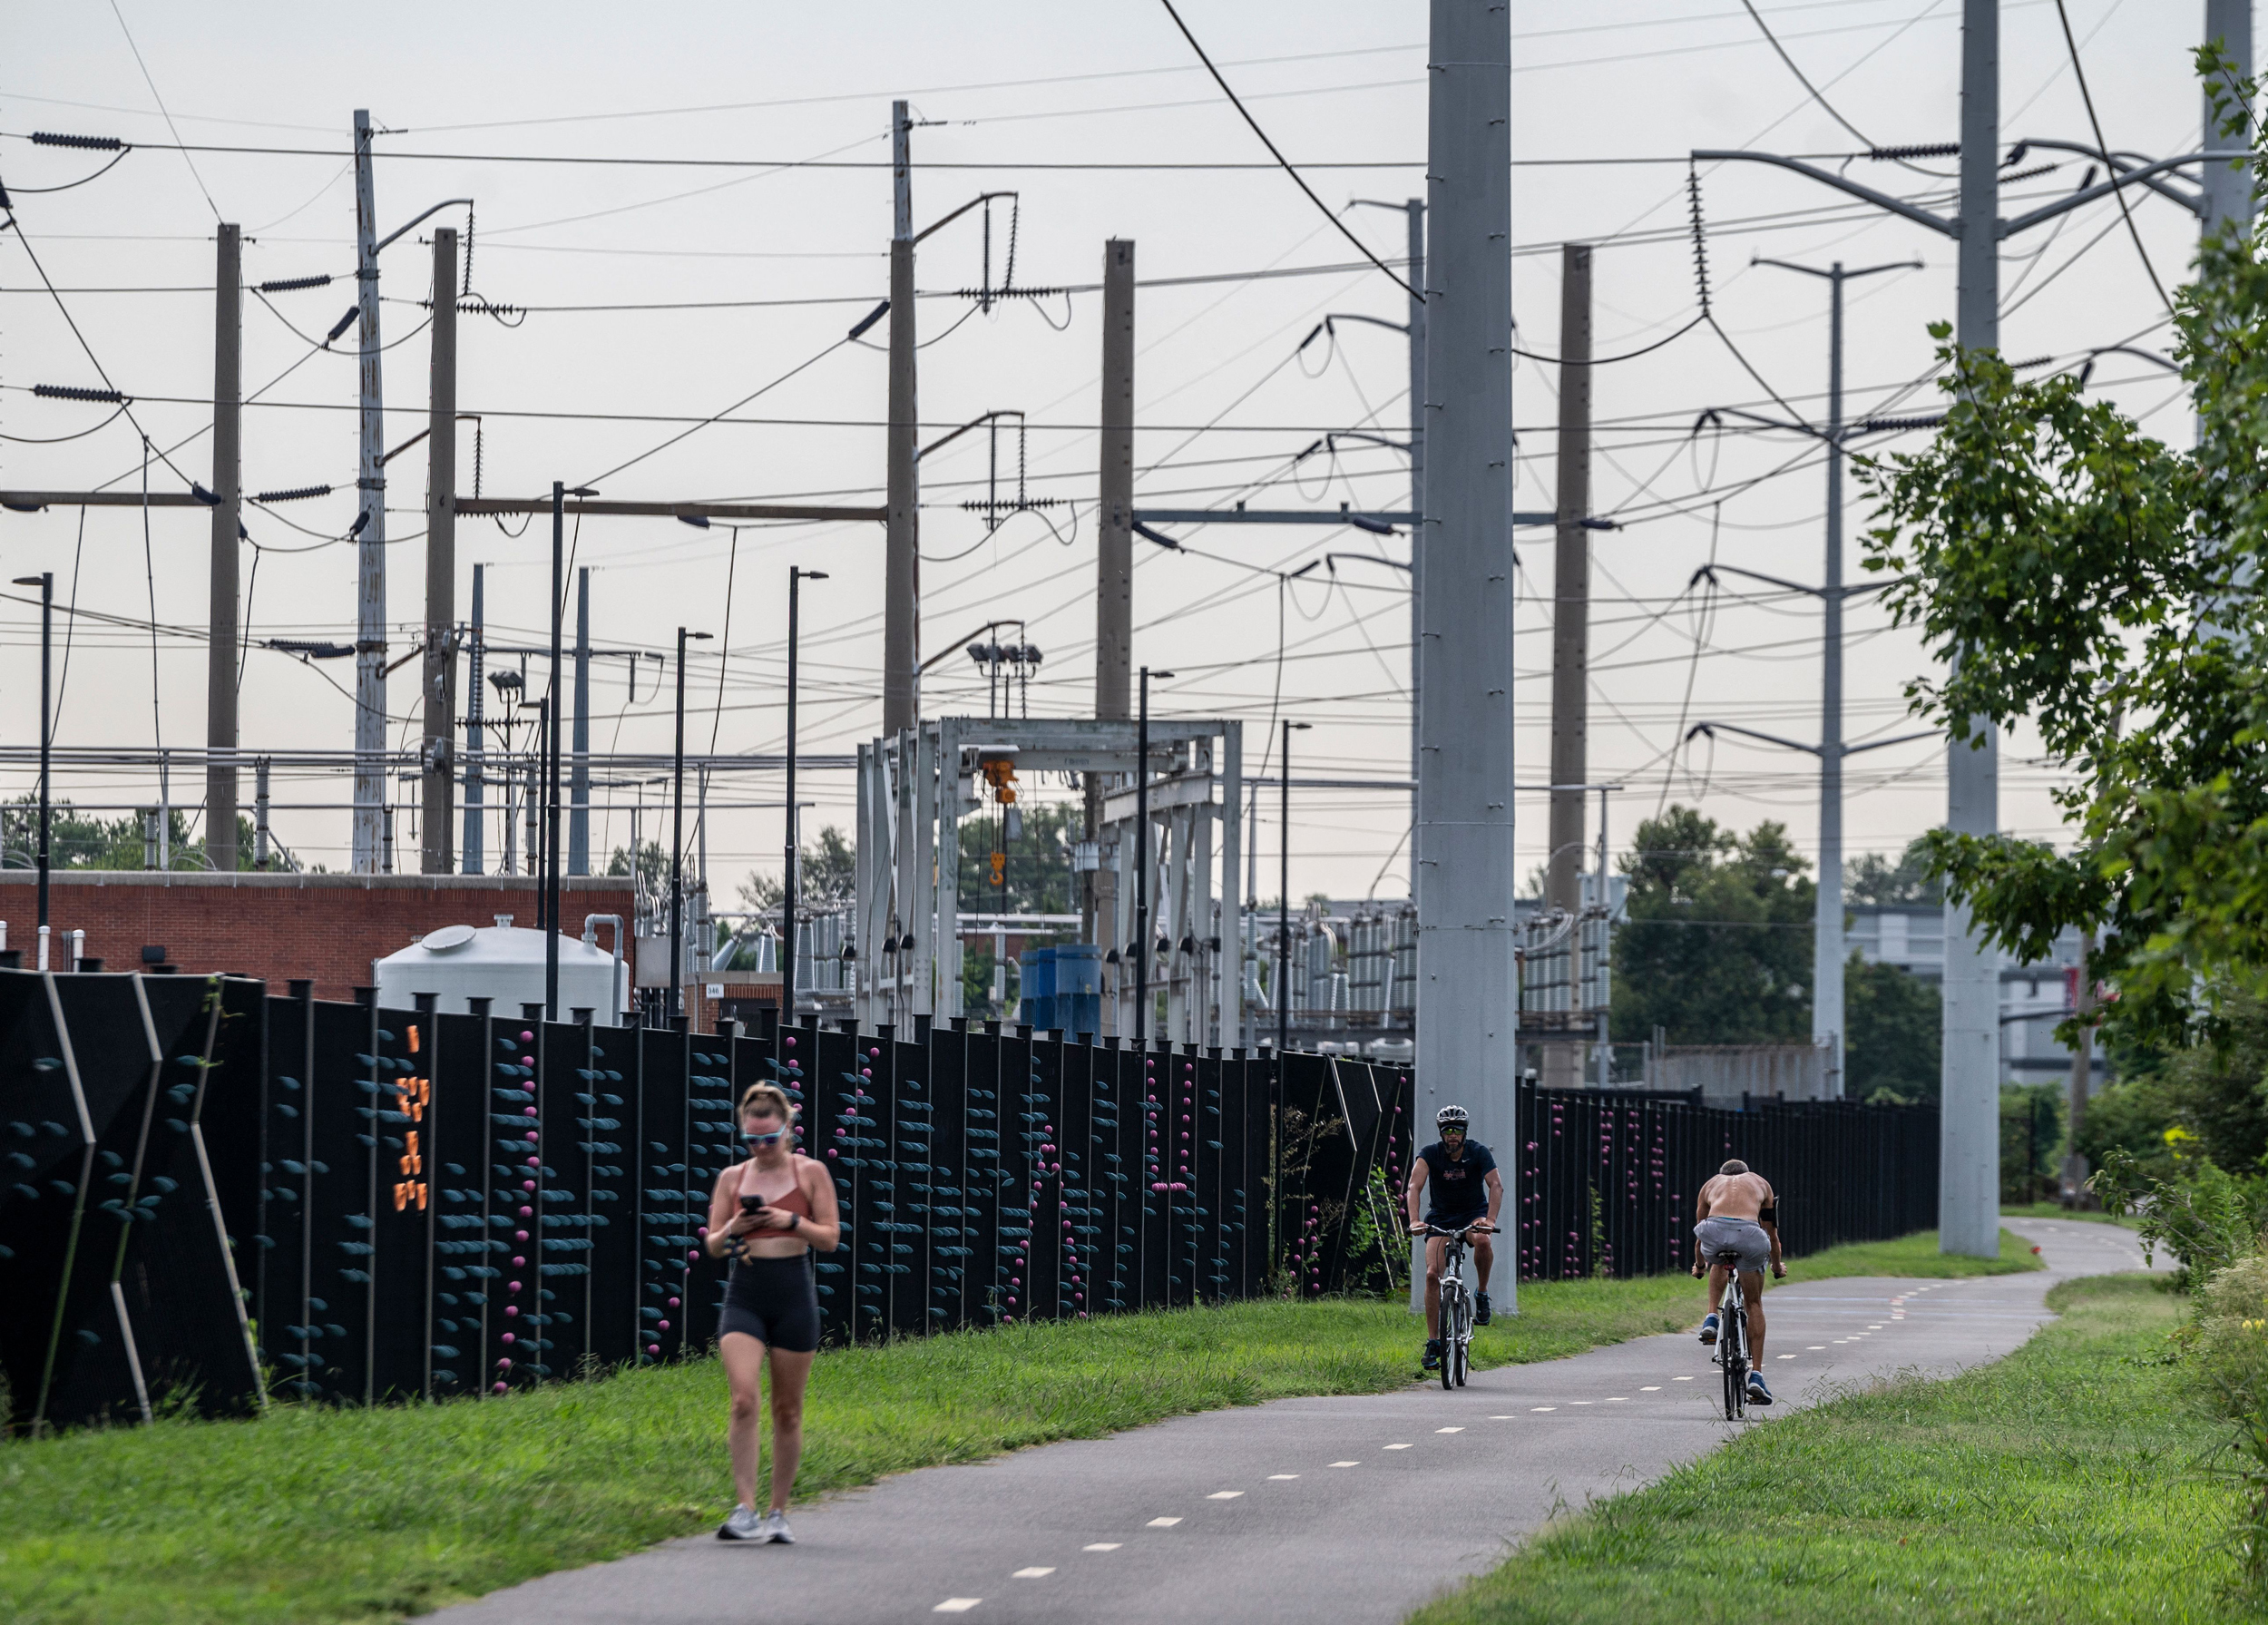 People pass electrical power lines on a a bike path in Arlington, Va. Credit: Andrew Caballero-Reynolds/AFP via Getty Images